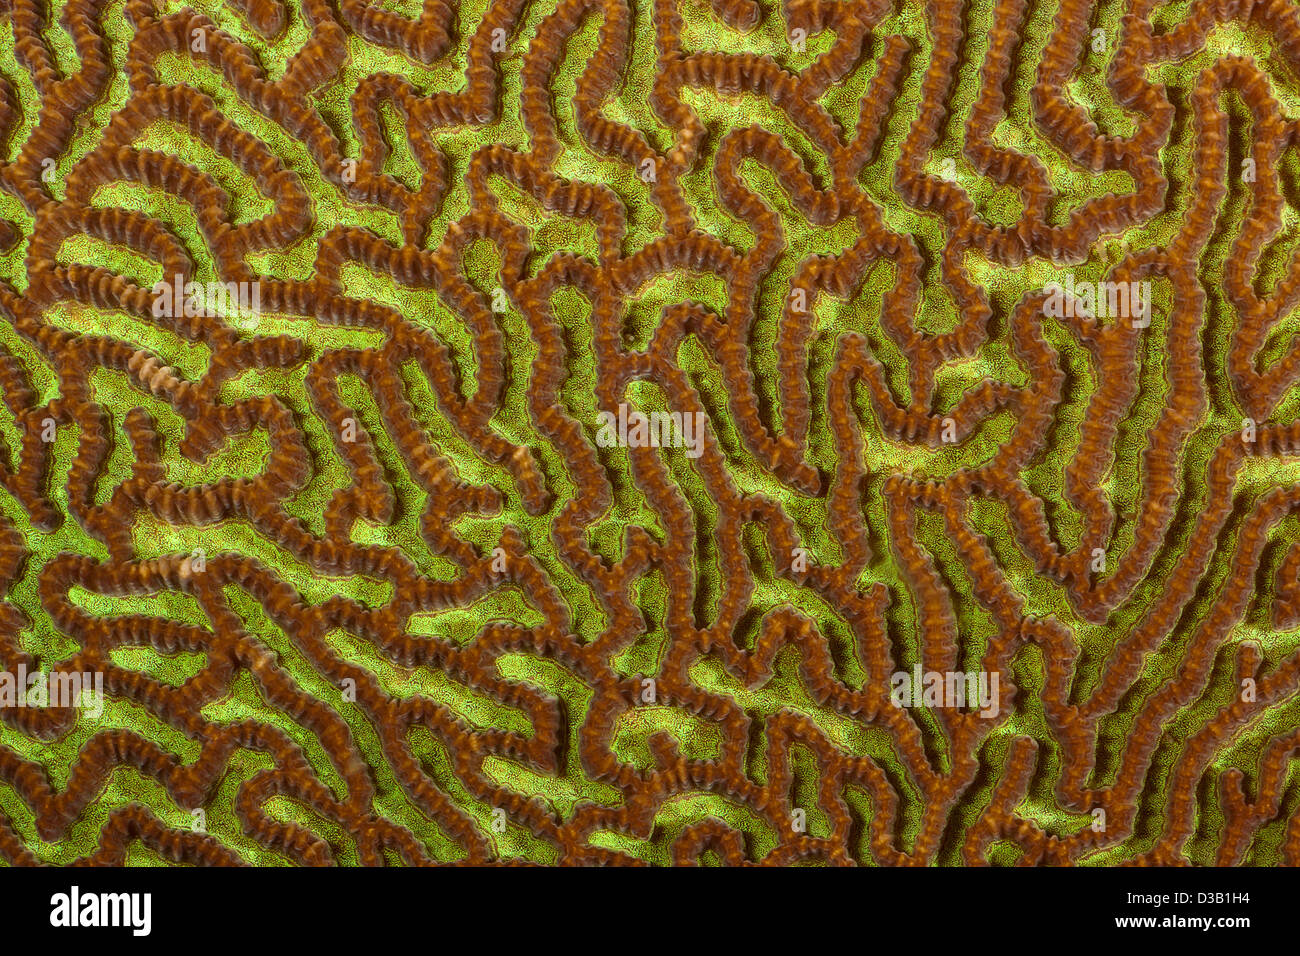 A close look at brain coral, Platygyra sp., photographed at night in Tubbataha Reef National Park, Philippines. Stock Photo